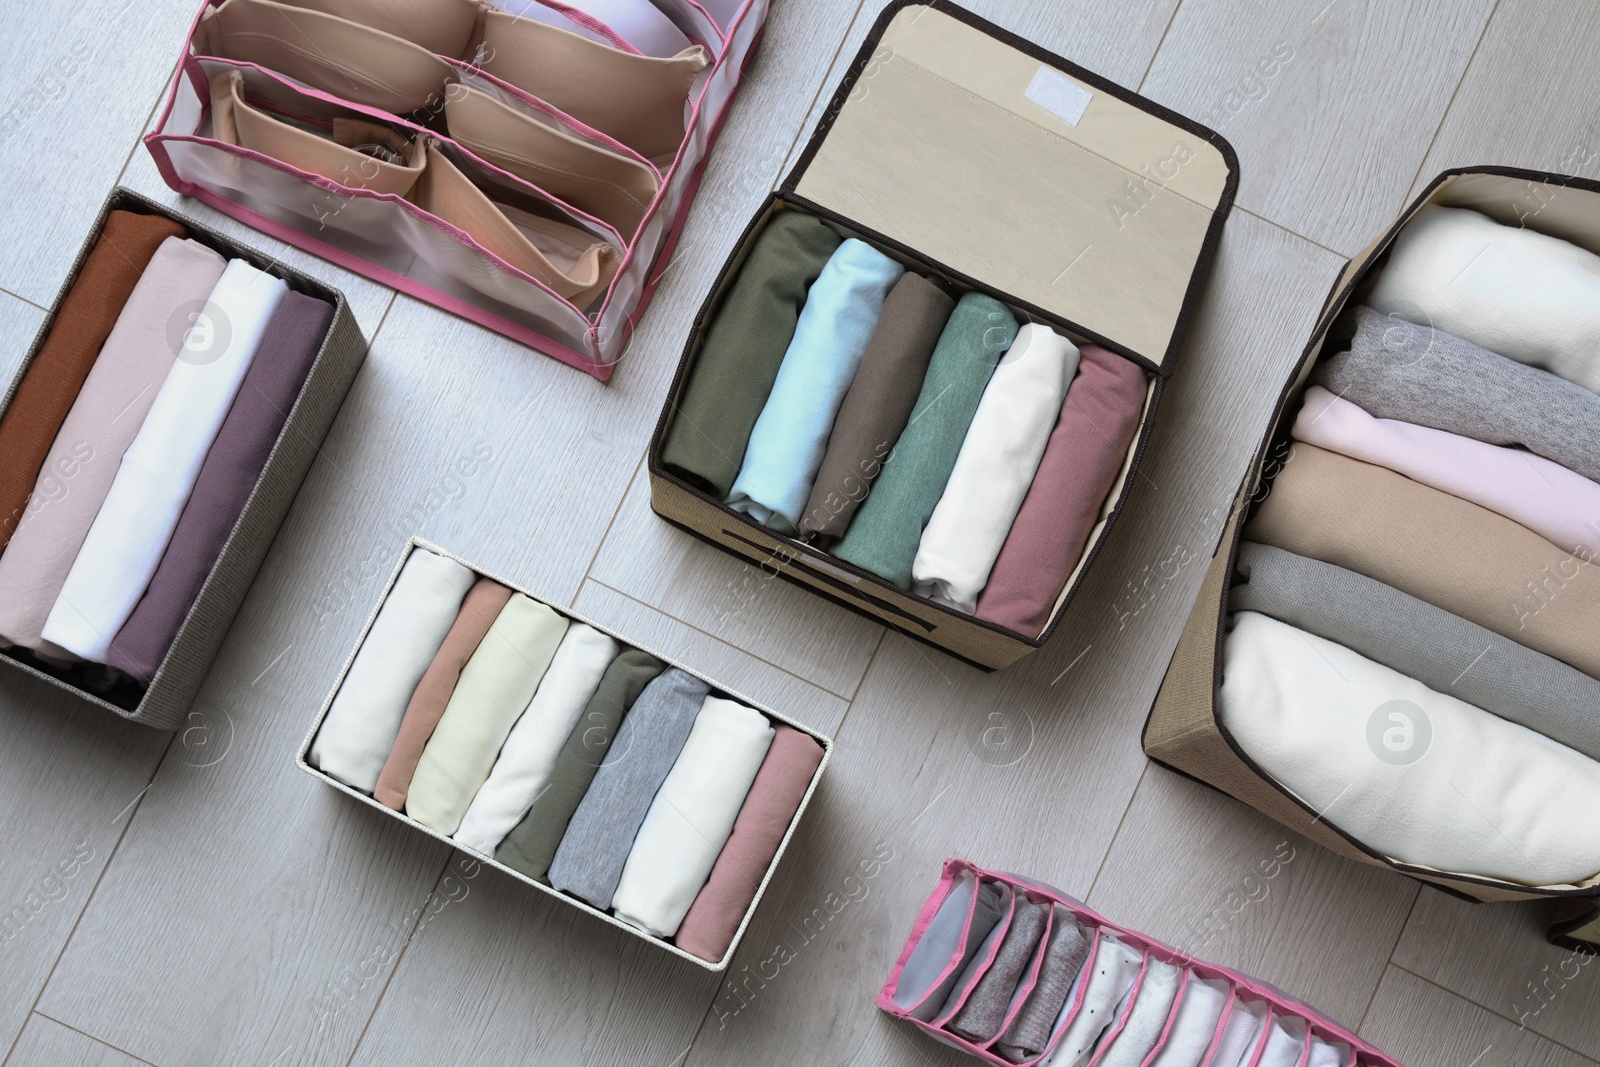 Photo of Different organizers with folded clothes and underwear on white wooden background, flat lay. Vertical storage